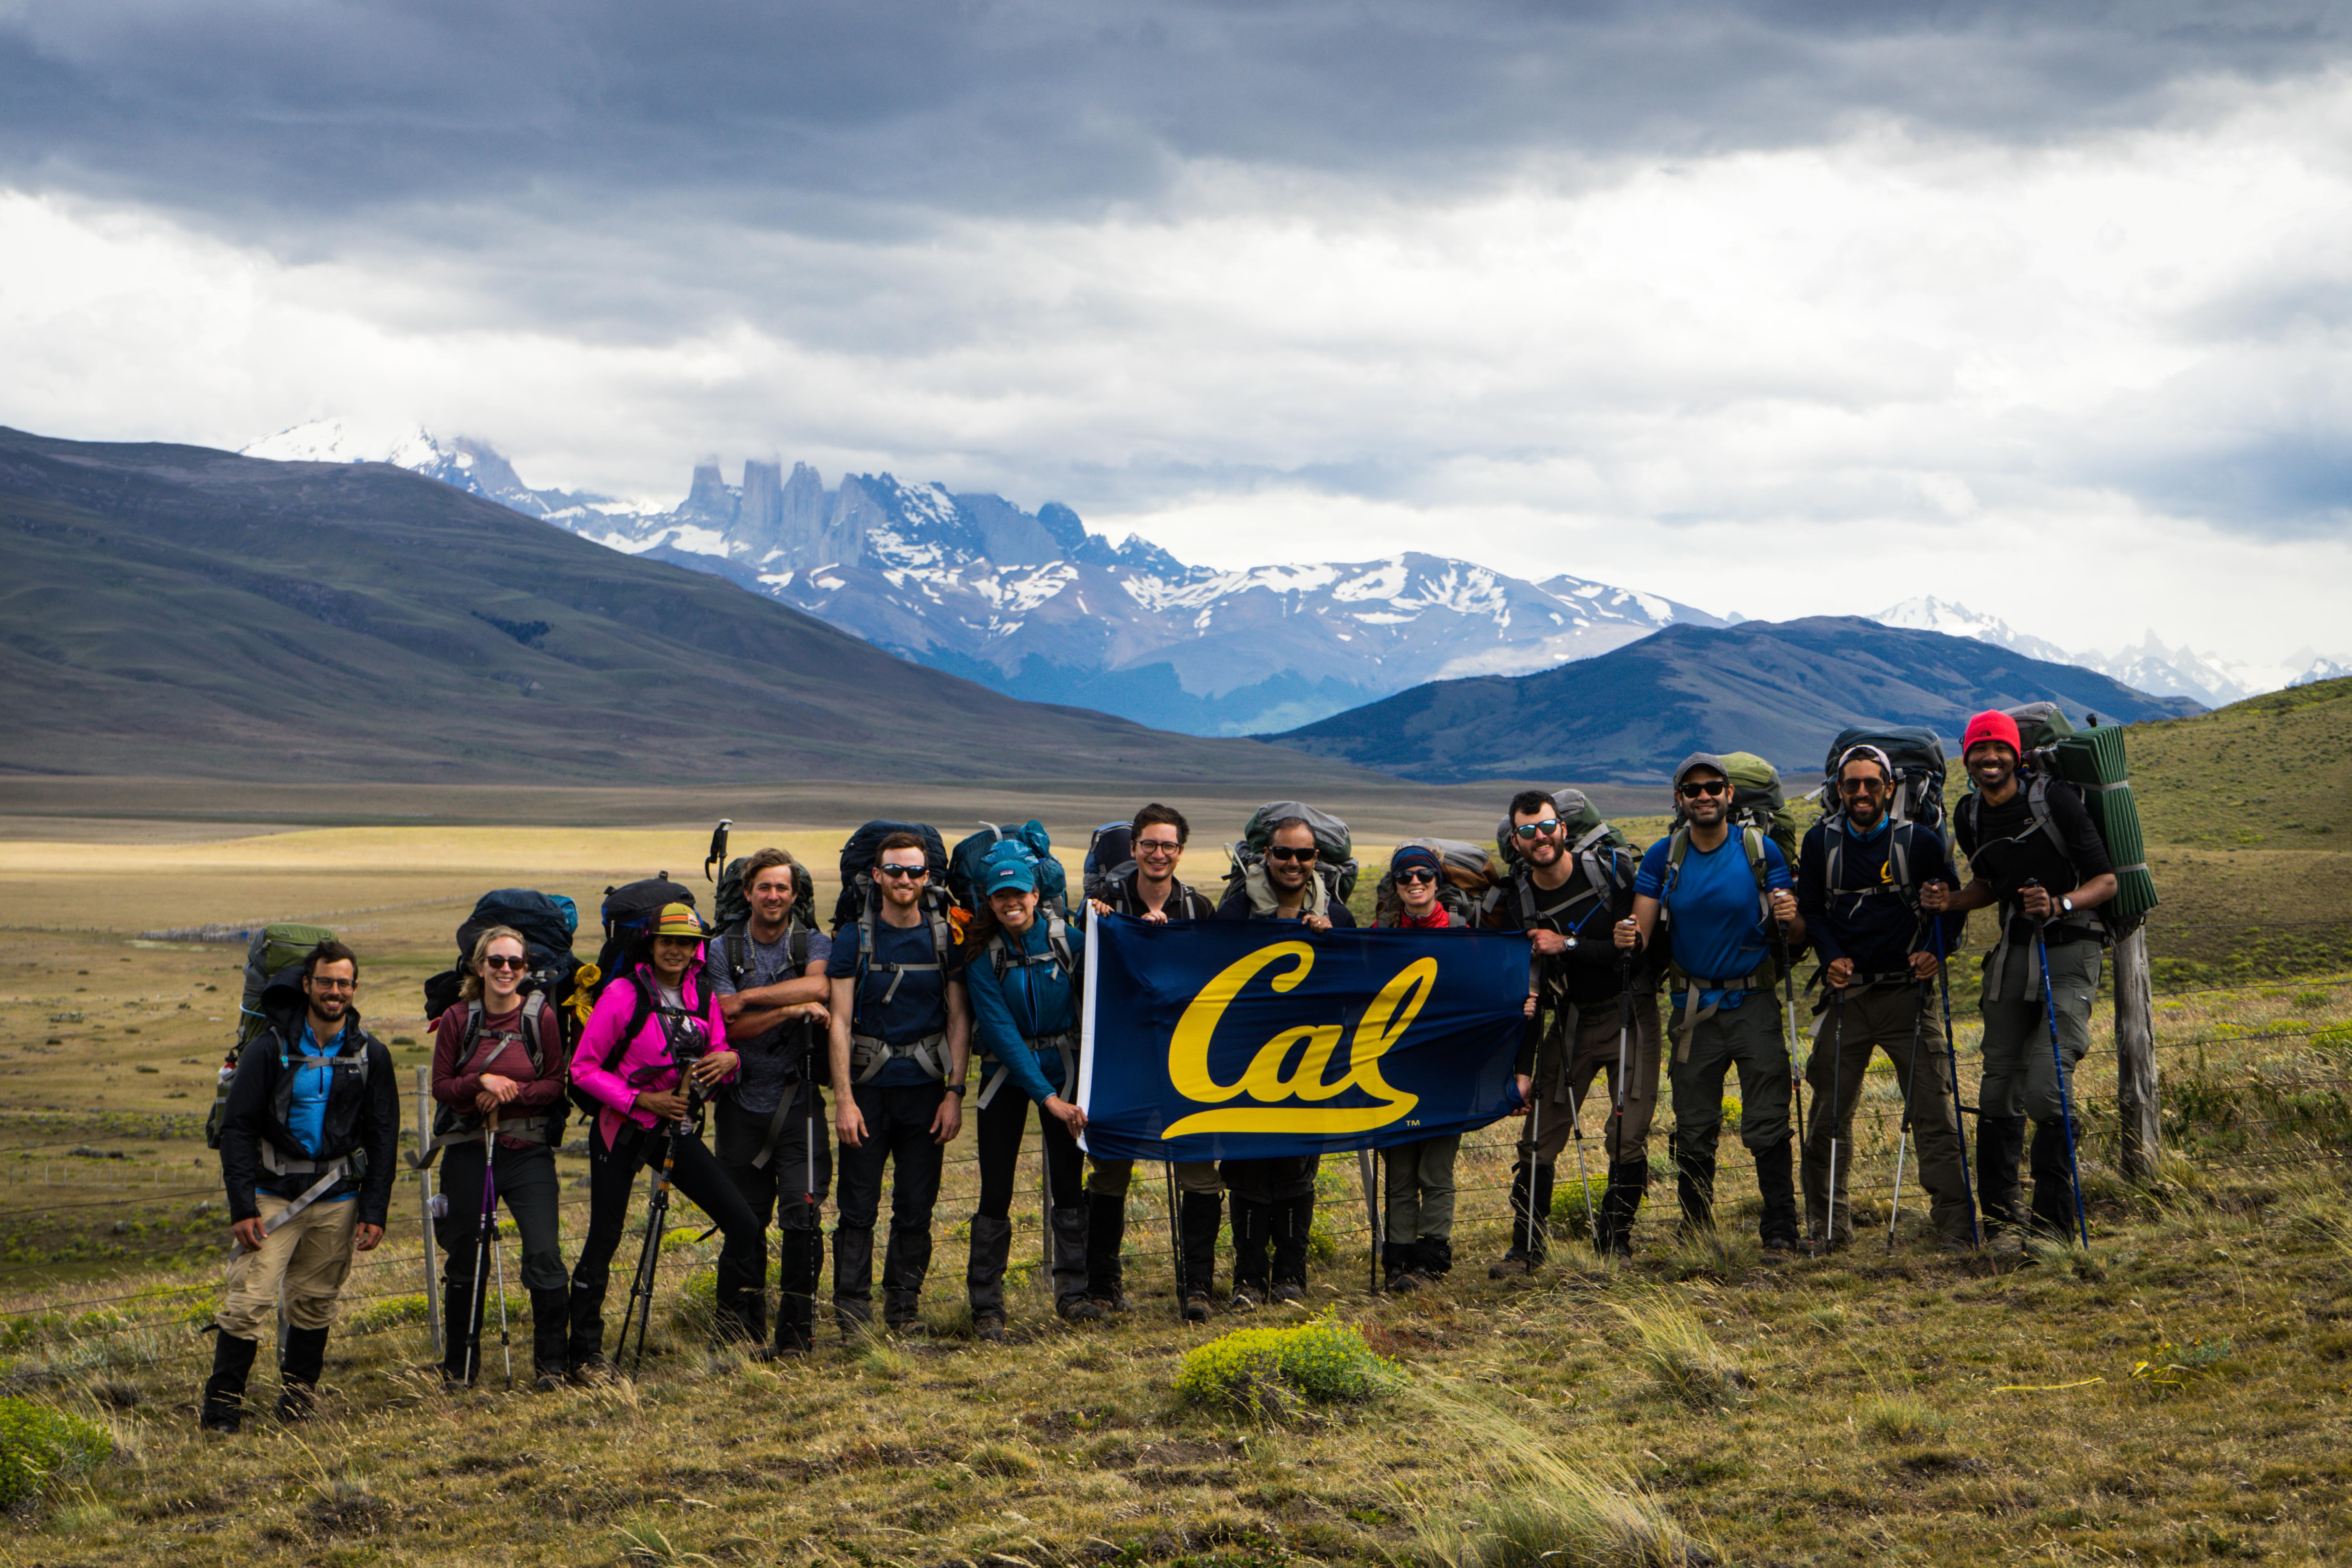 The Patagonia team holding the Cal banner.